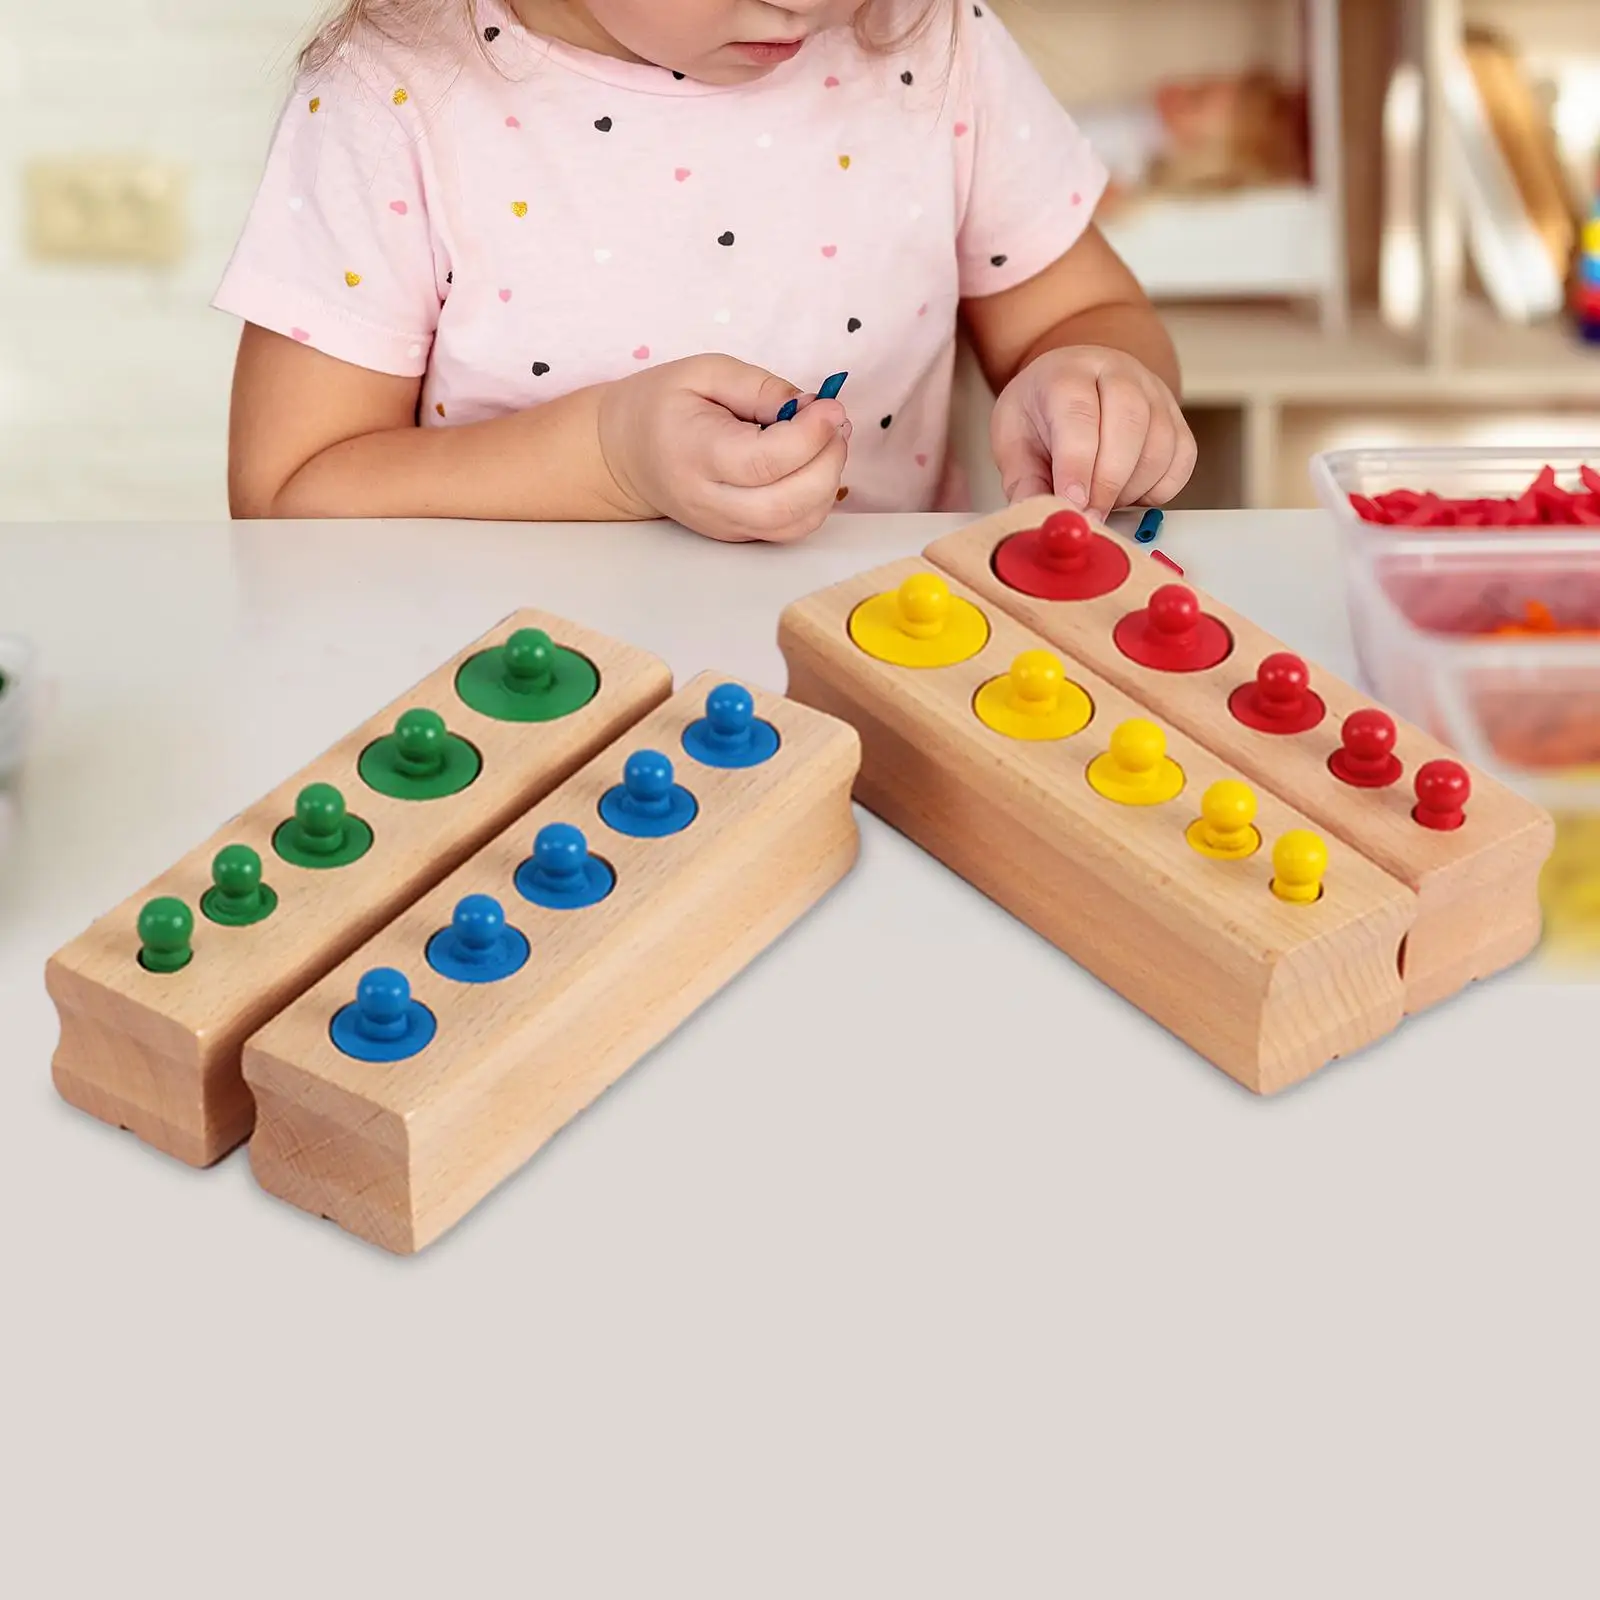 4Pcs Knobbed Cylinders Blocks Socket Early Development Montessori Toy Wooden Cylinders Ladder Blocks for School Home Kids Baby